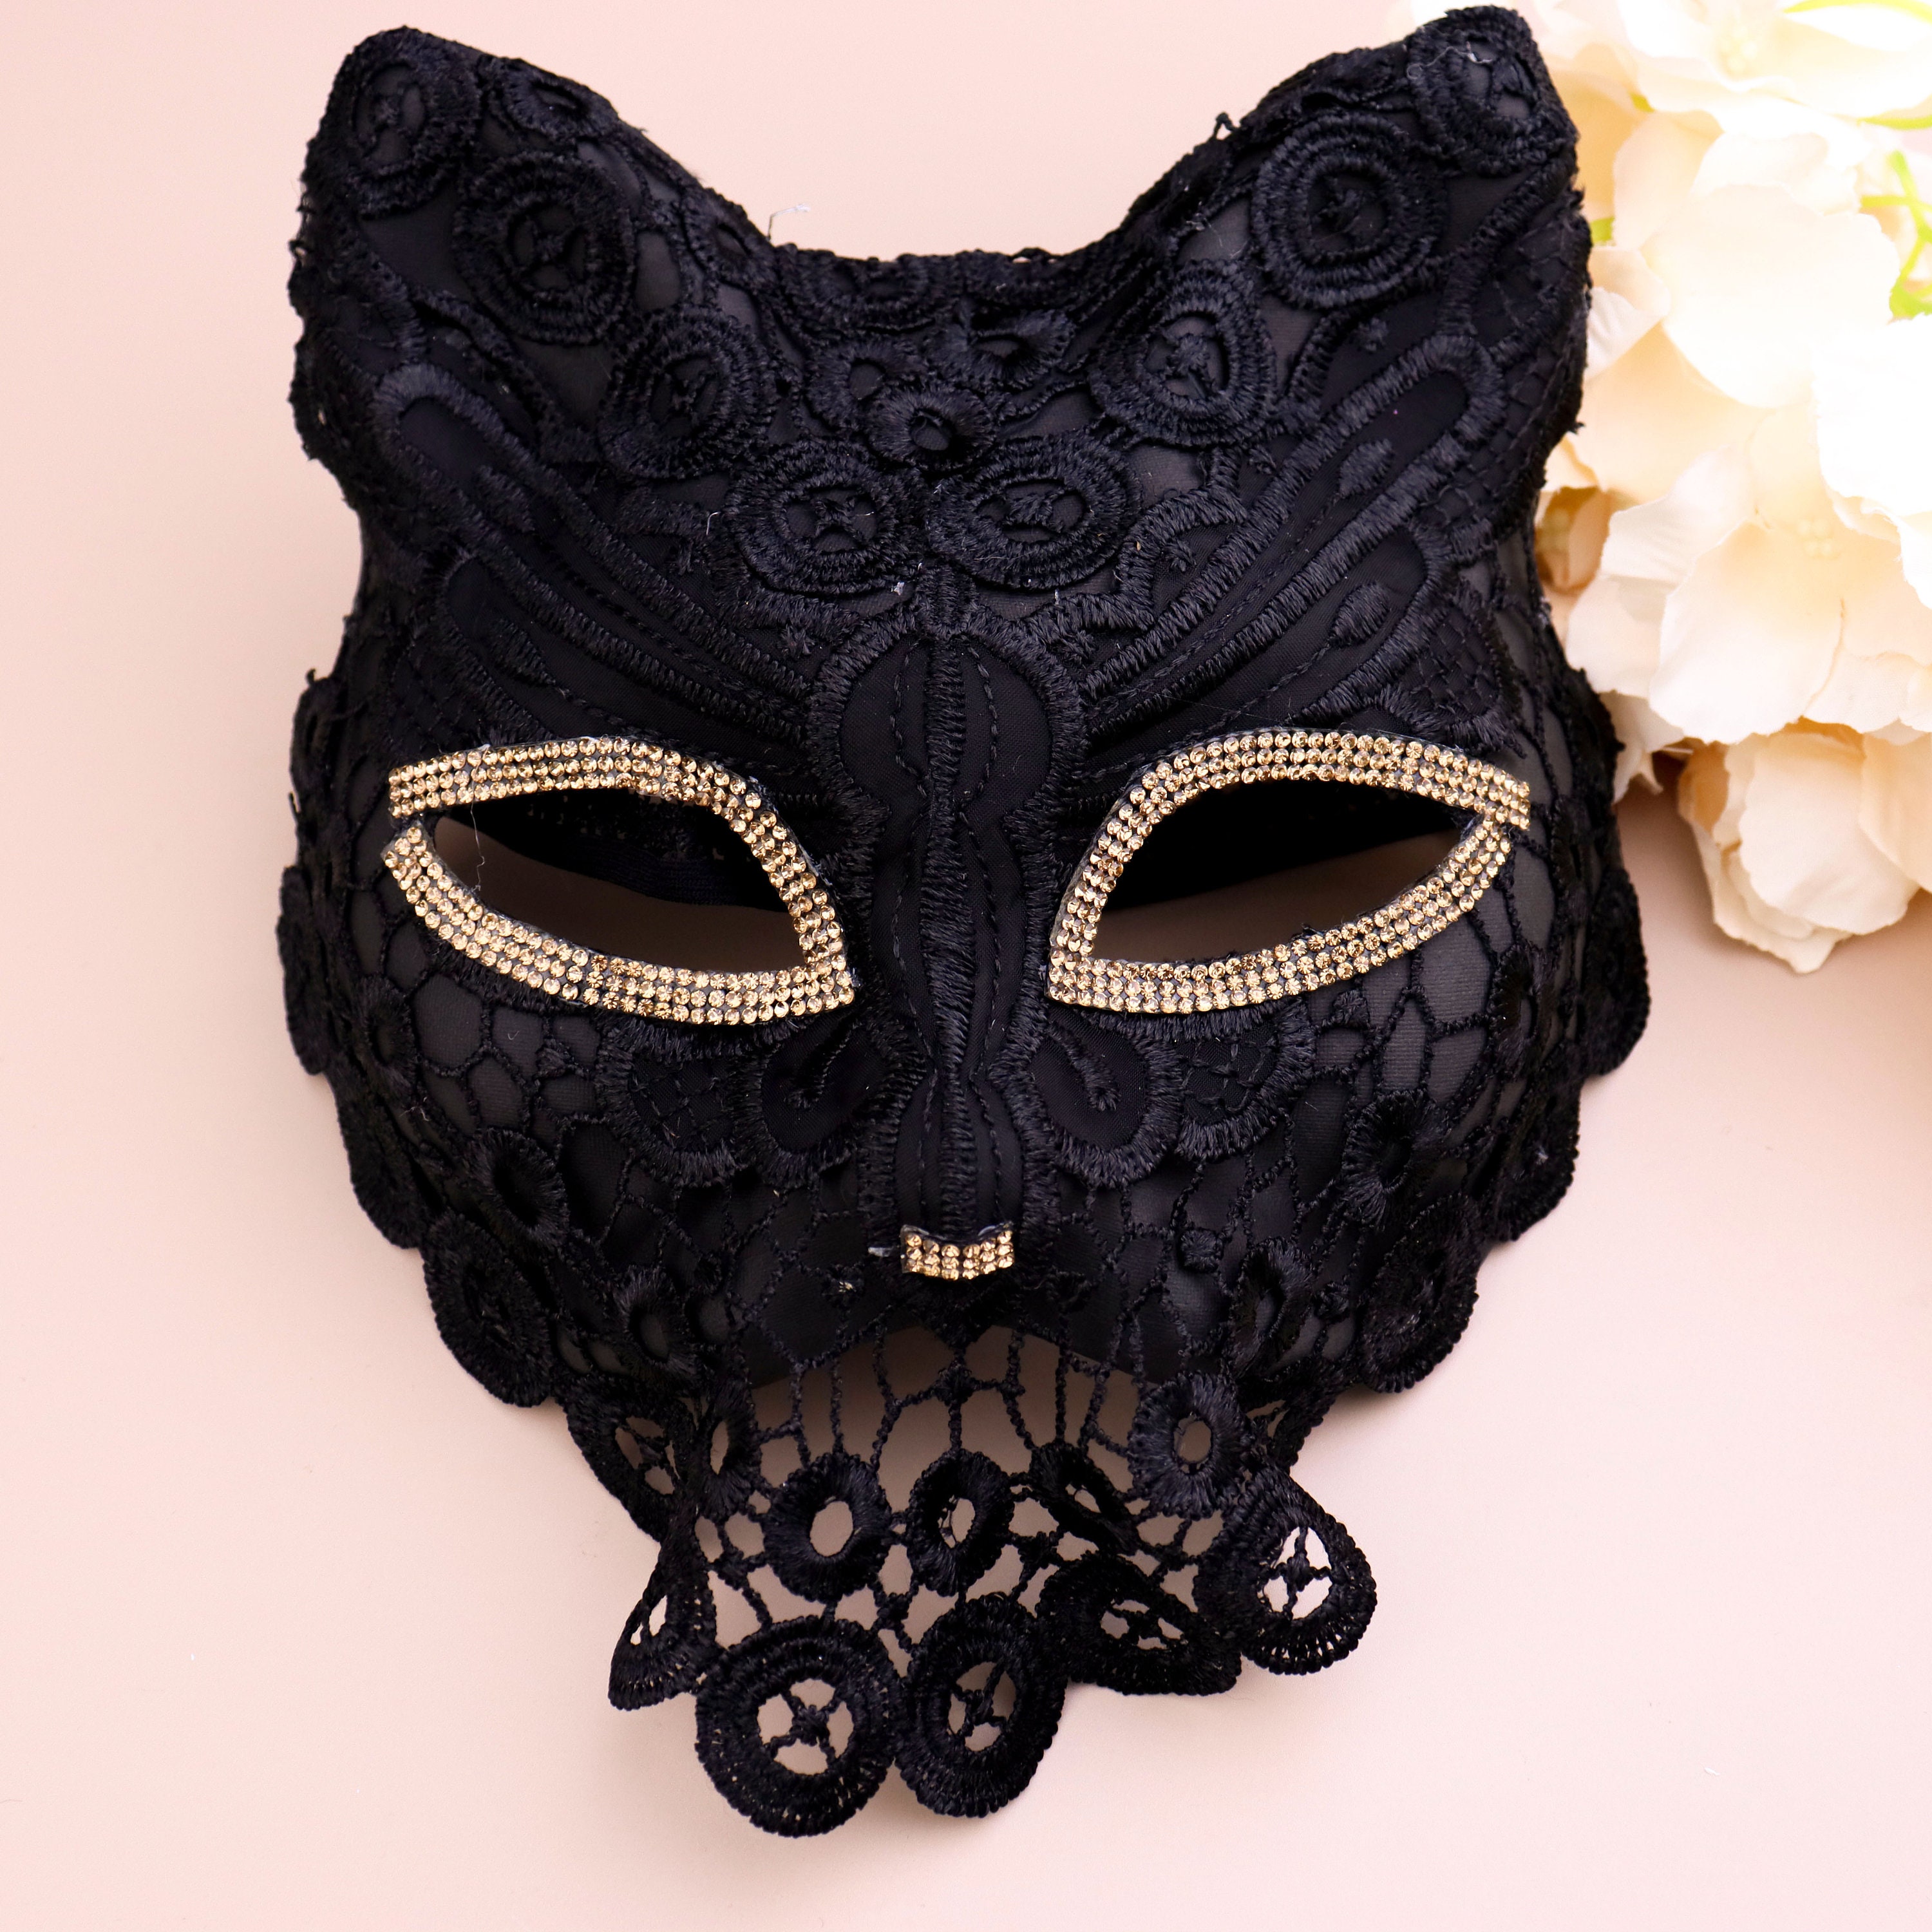 Sratte 3 Pcs Halloween Cat Masks Cat Half Eye Black Masquerade Mask for  Women Girls Halloween Cosplay Costumes Accessories Dress-up Theme Party  Favors